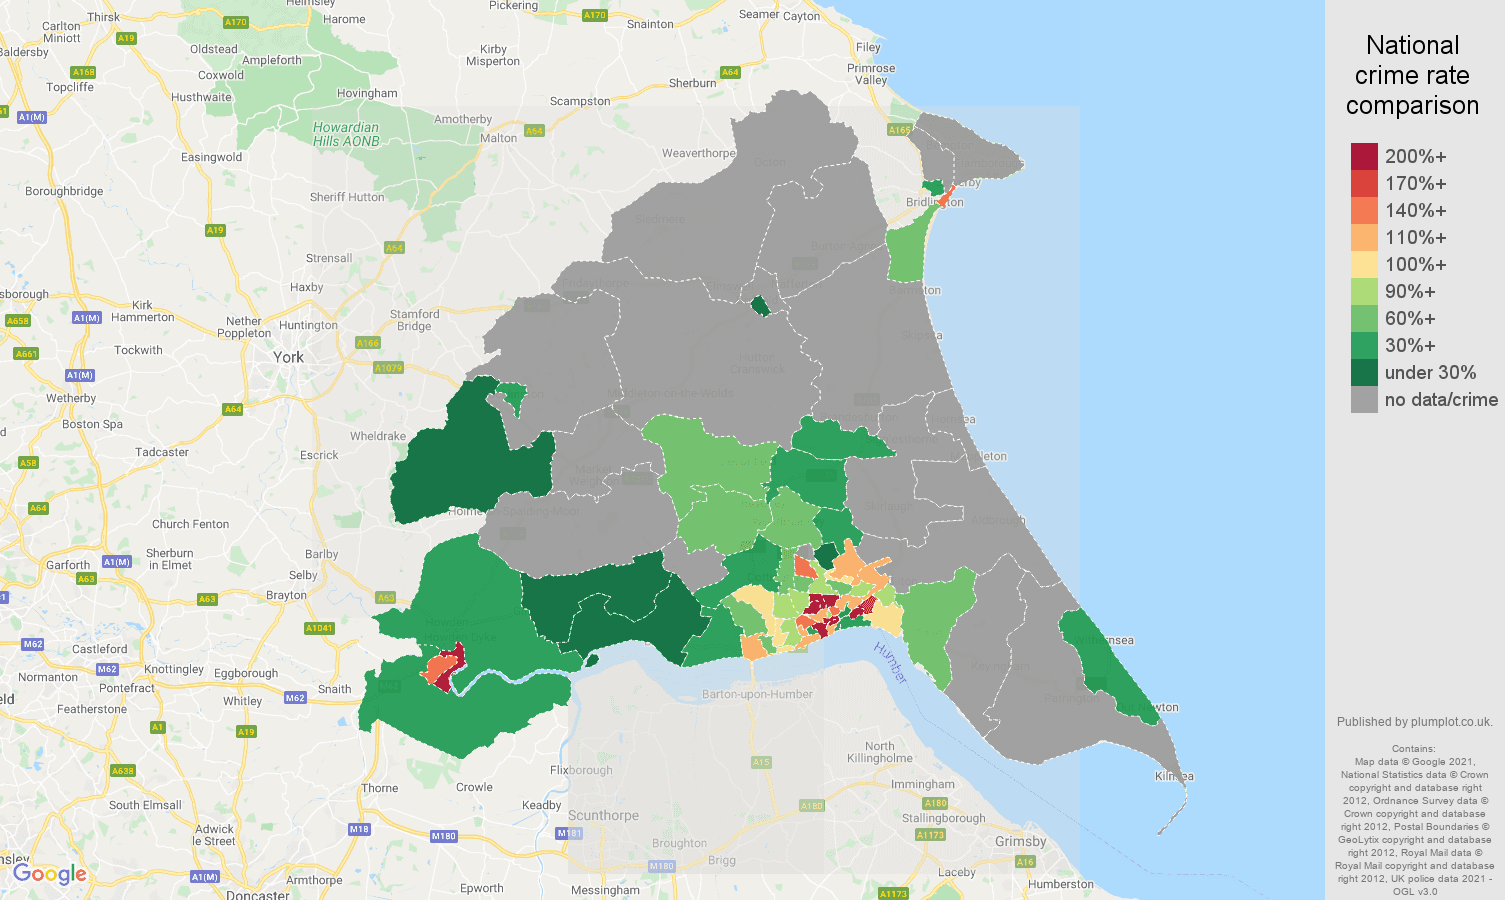 East Riding of Yorkshire bicycle theft crime rate comparison map